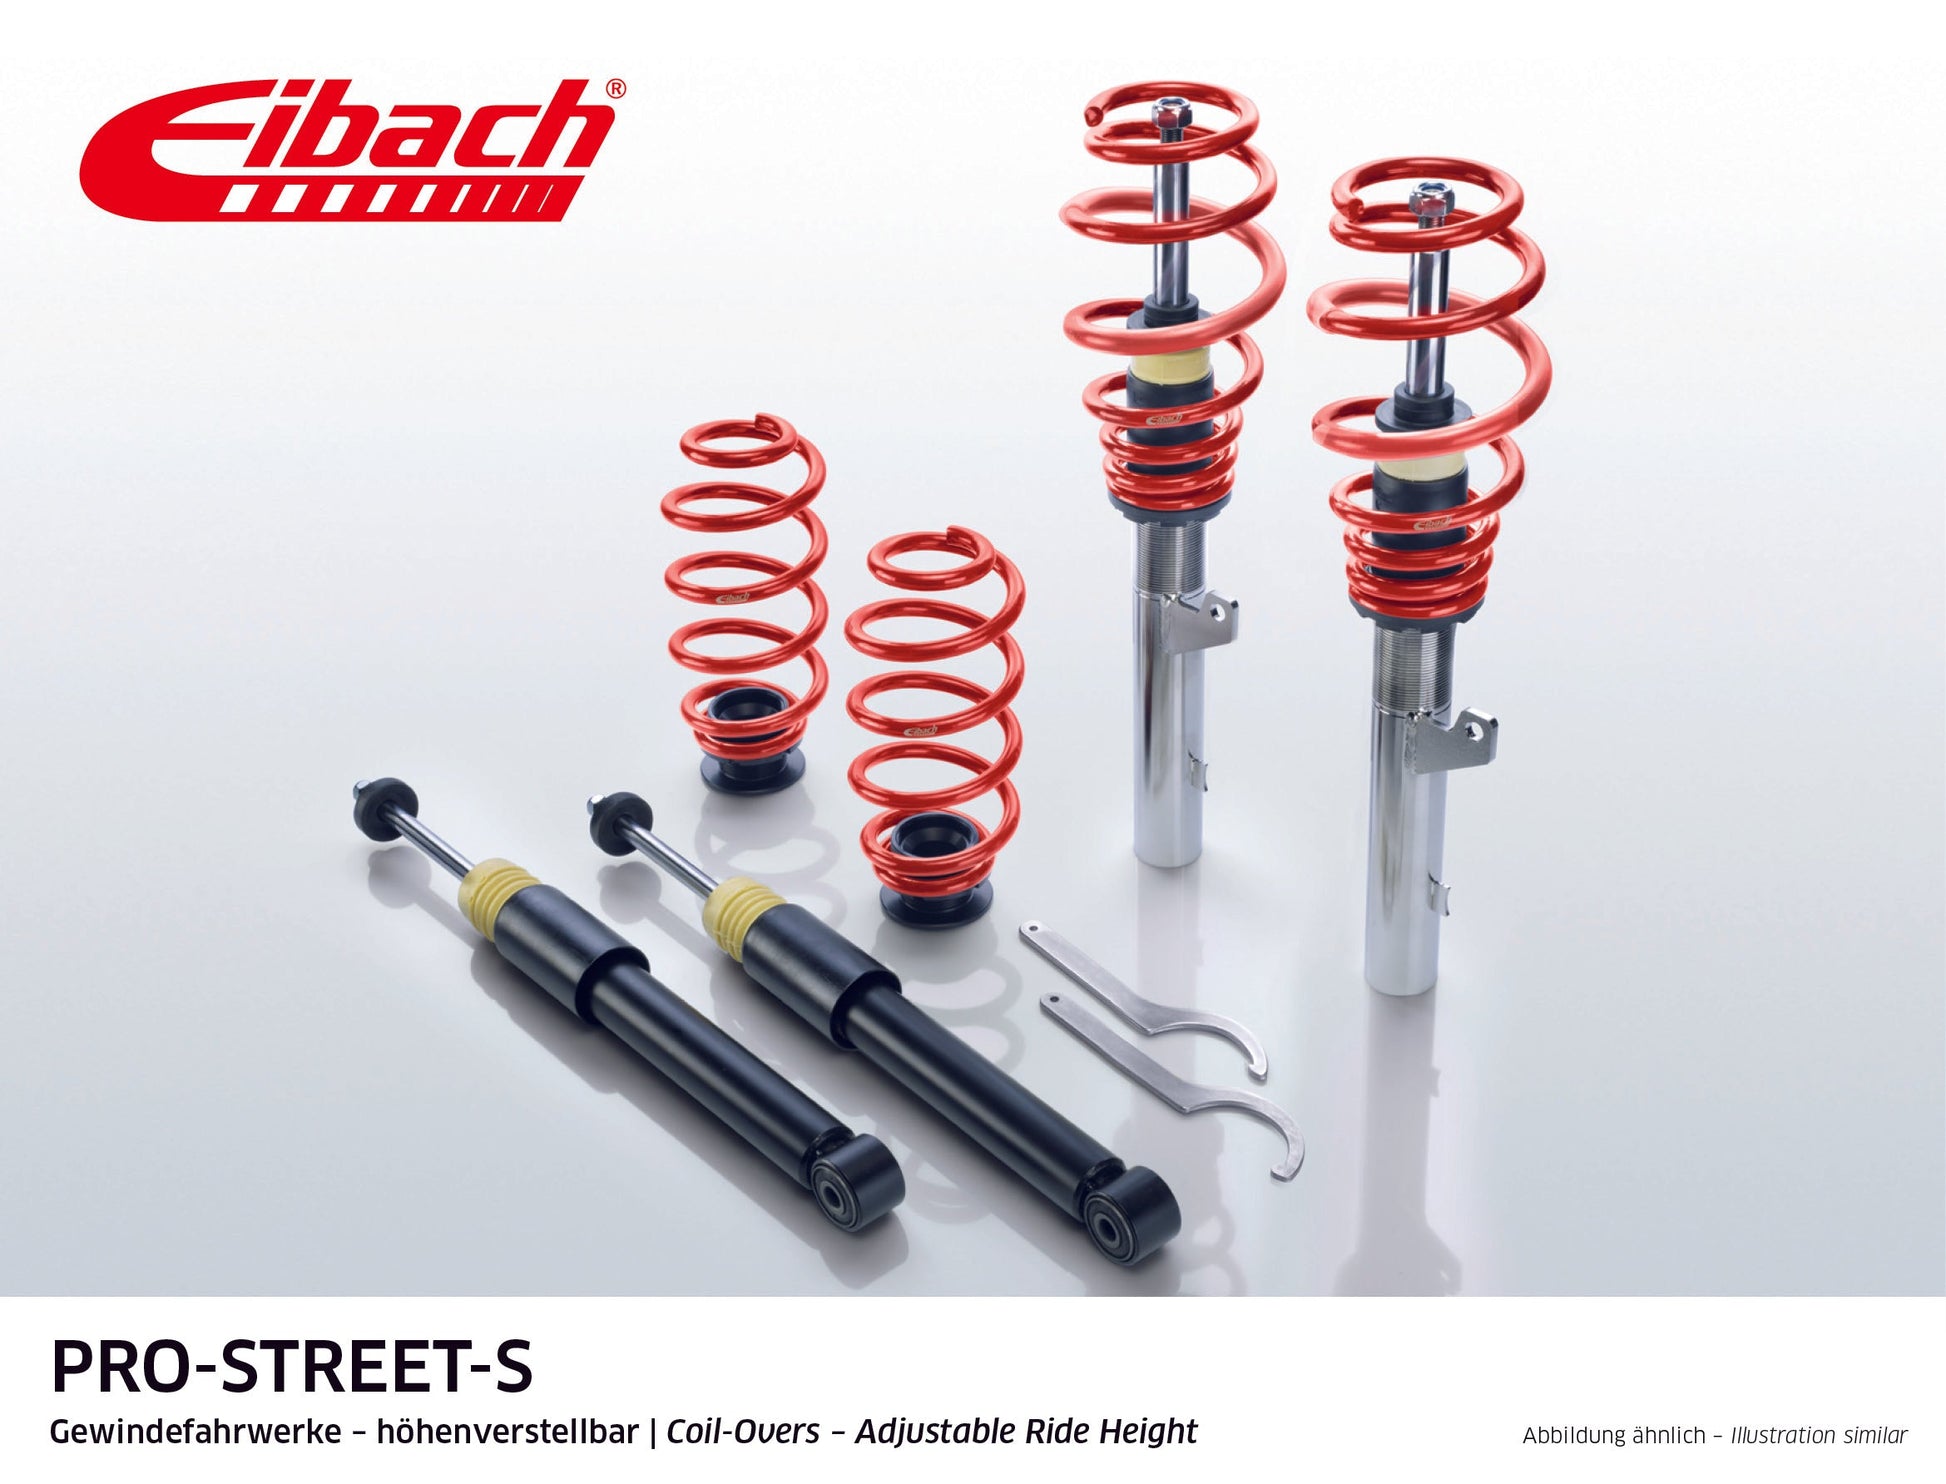 Eibach Pro-Street Coilover (PSS65-20-014-02-22) at £1217.92